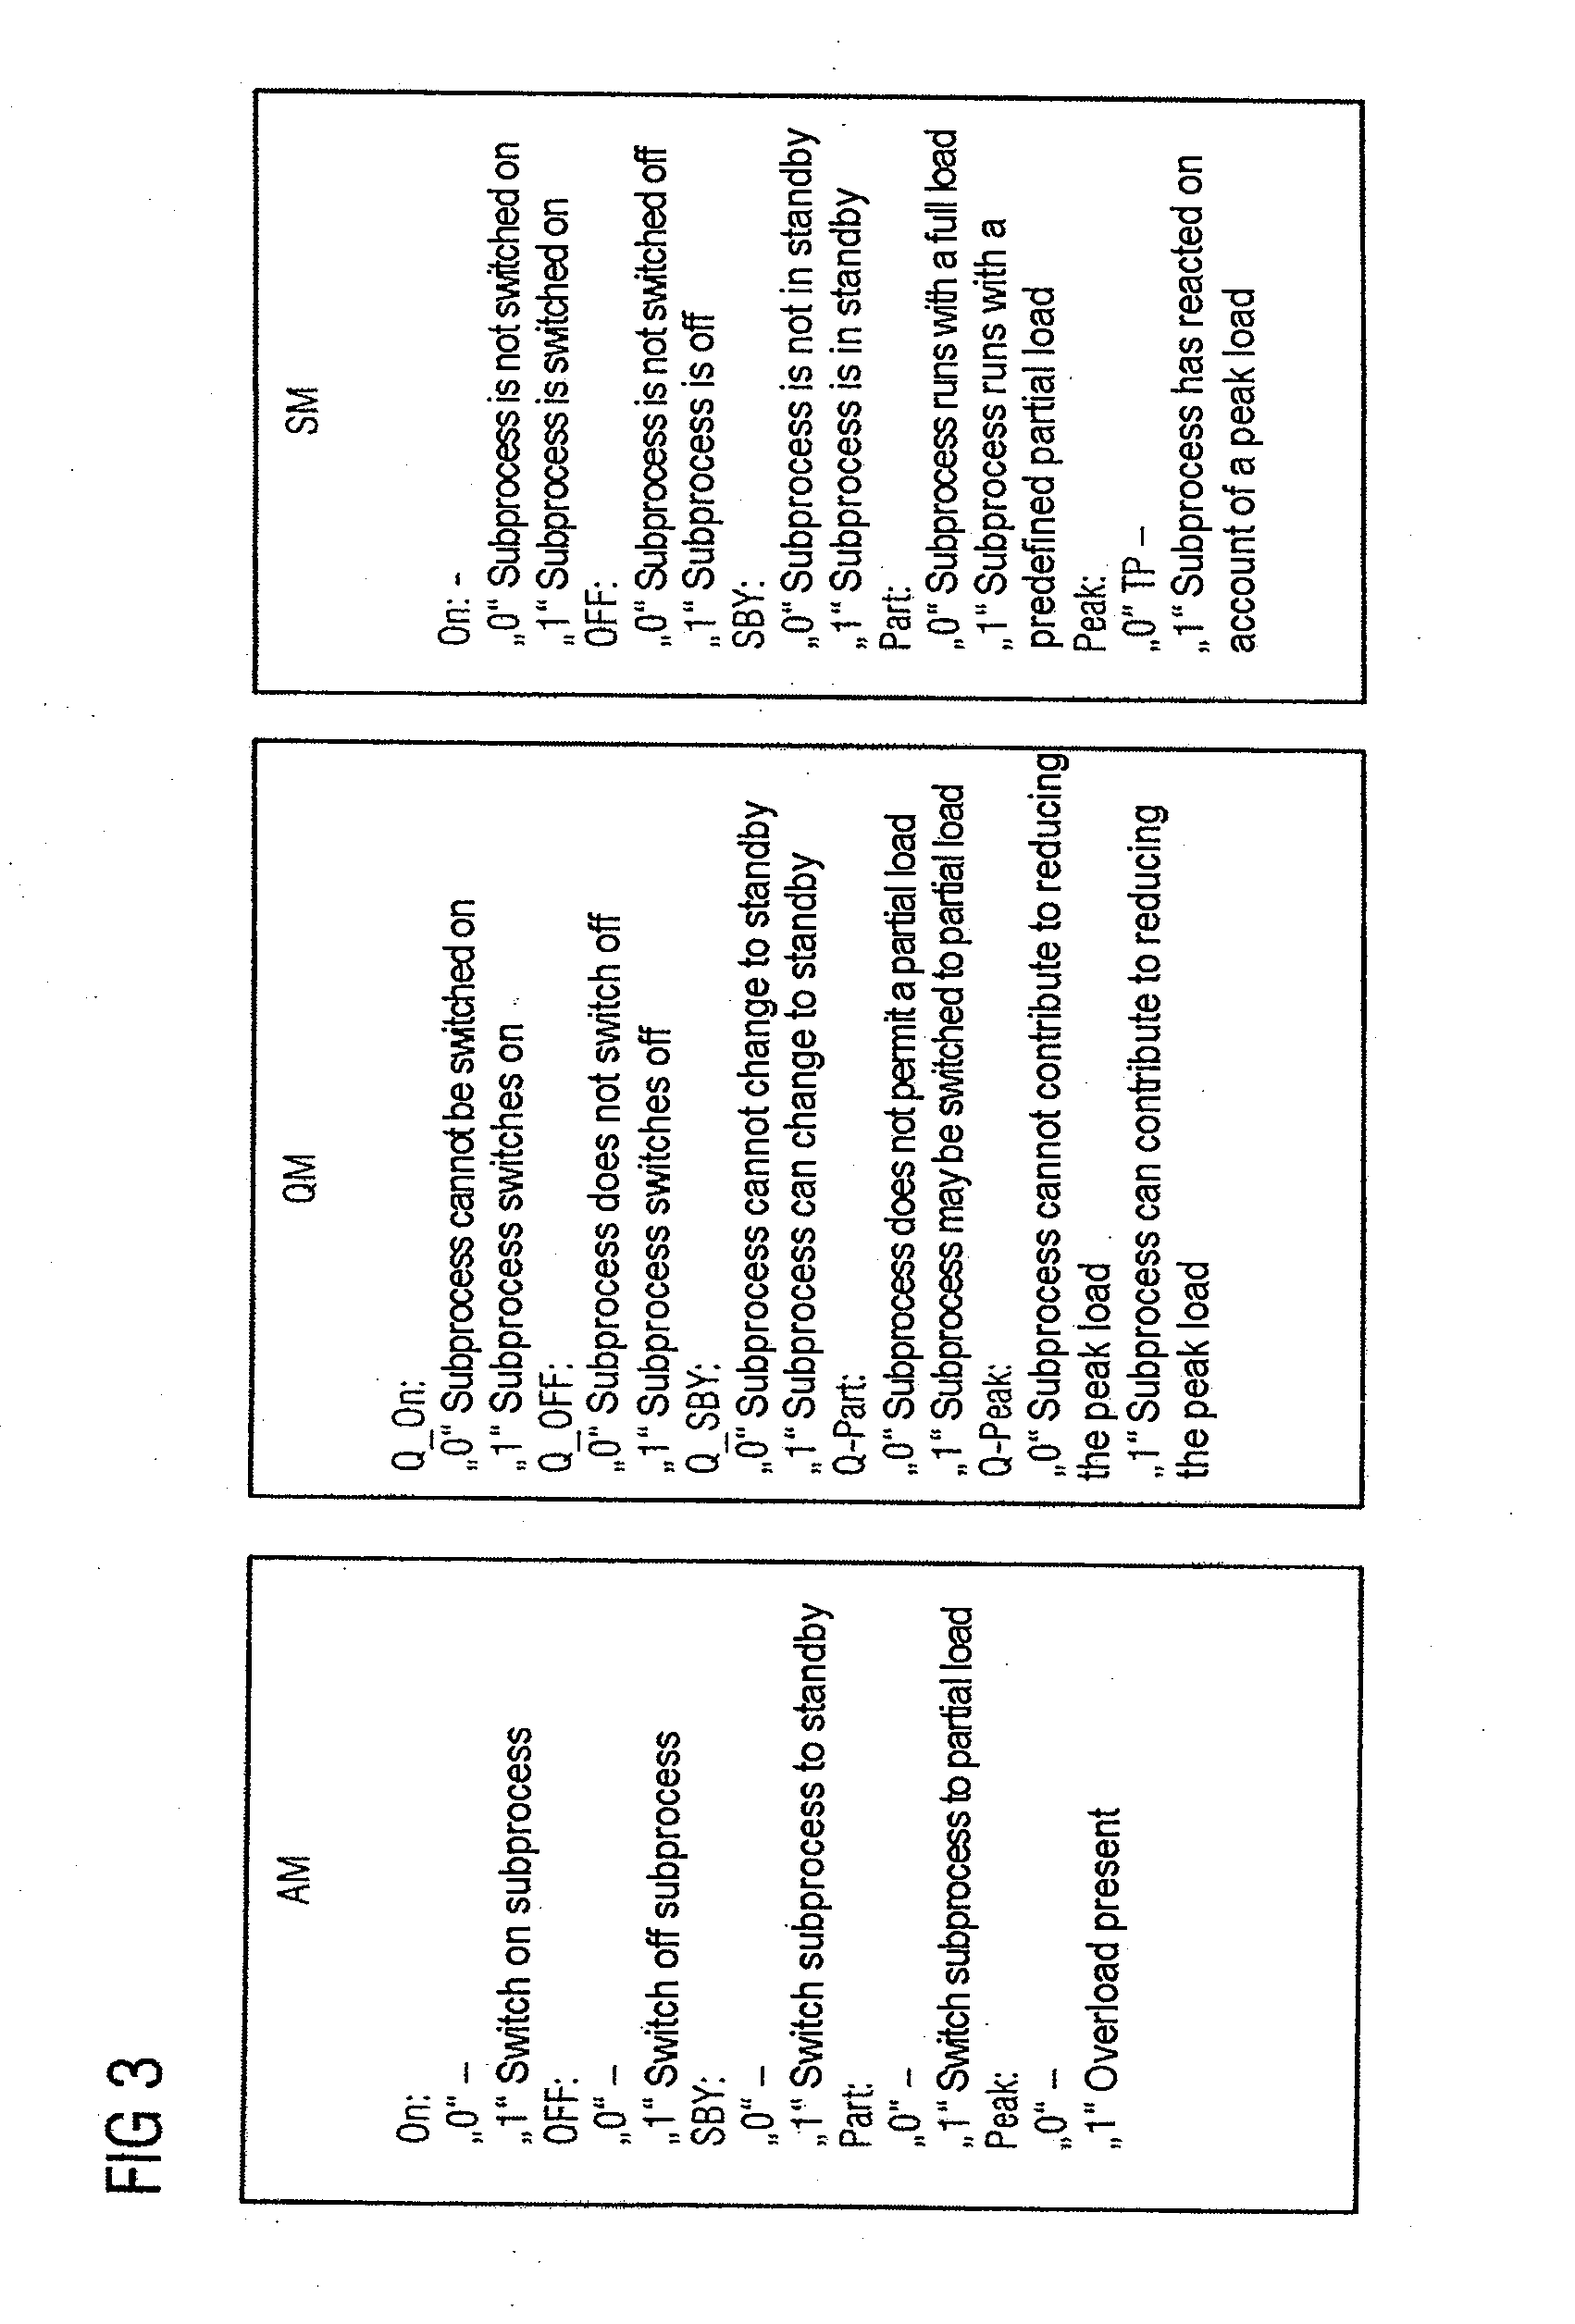 Control Component and Method for an Energy Management Unit in an Industrial Automation Arrangement